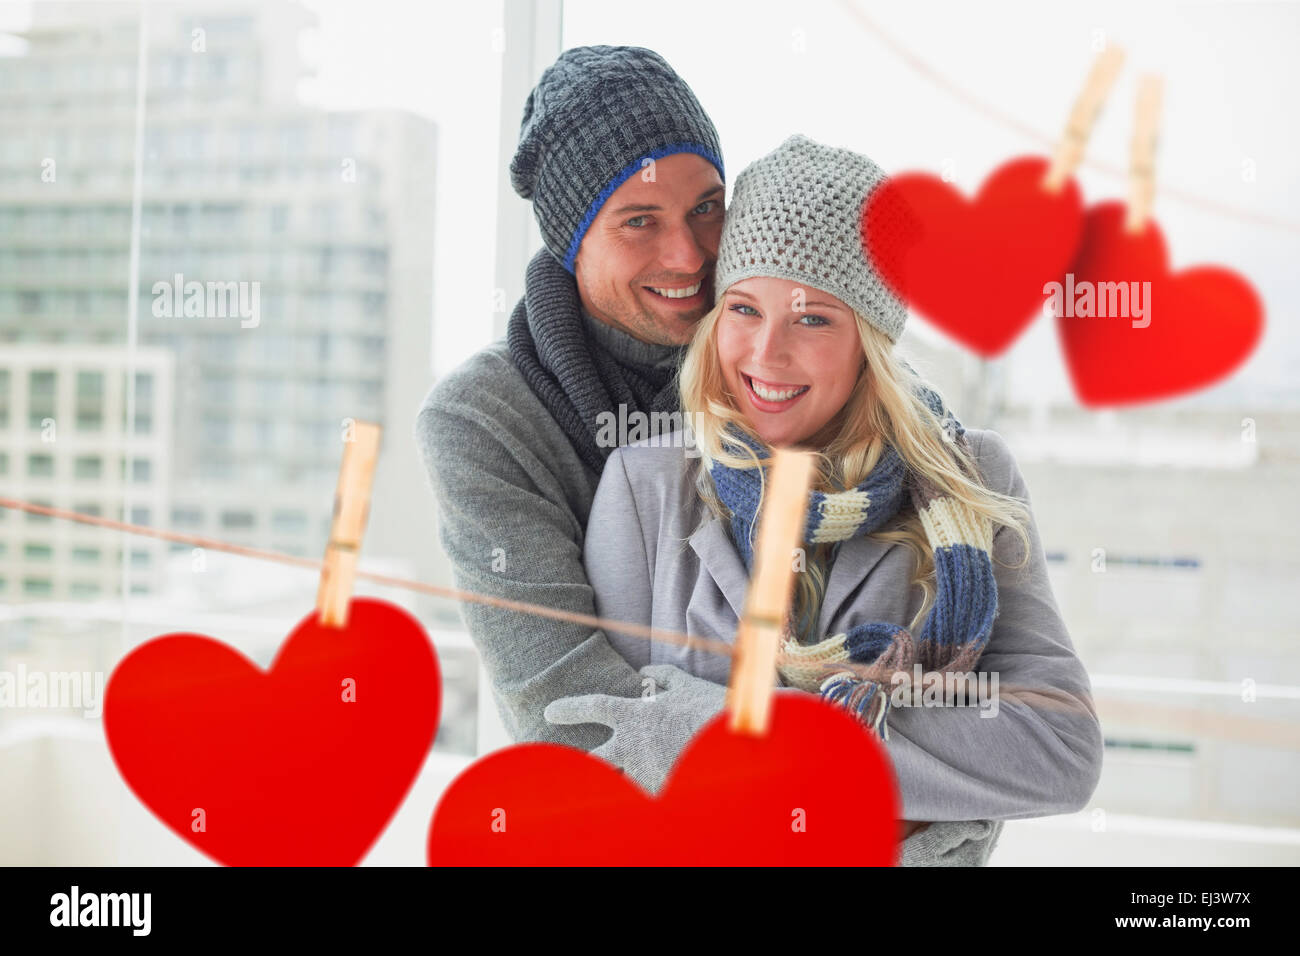 Composite image of cute couple in warm clothing smiling at camera Stock Photo